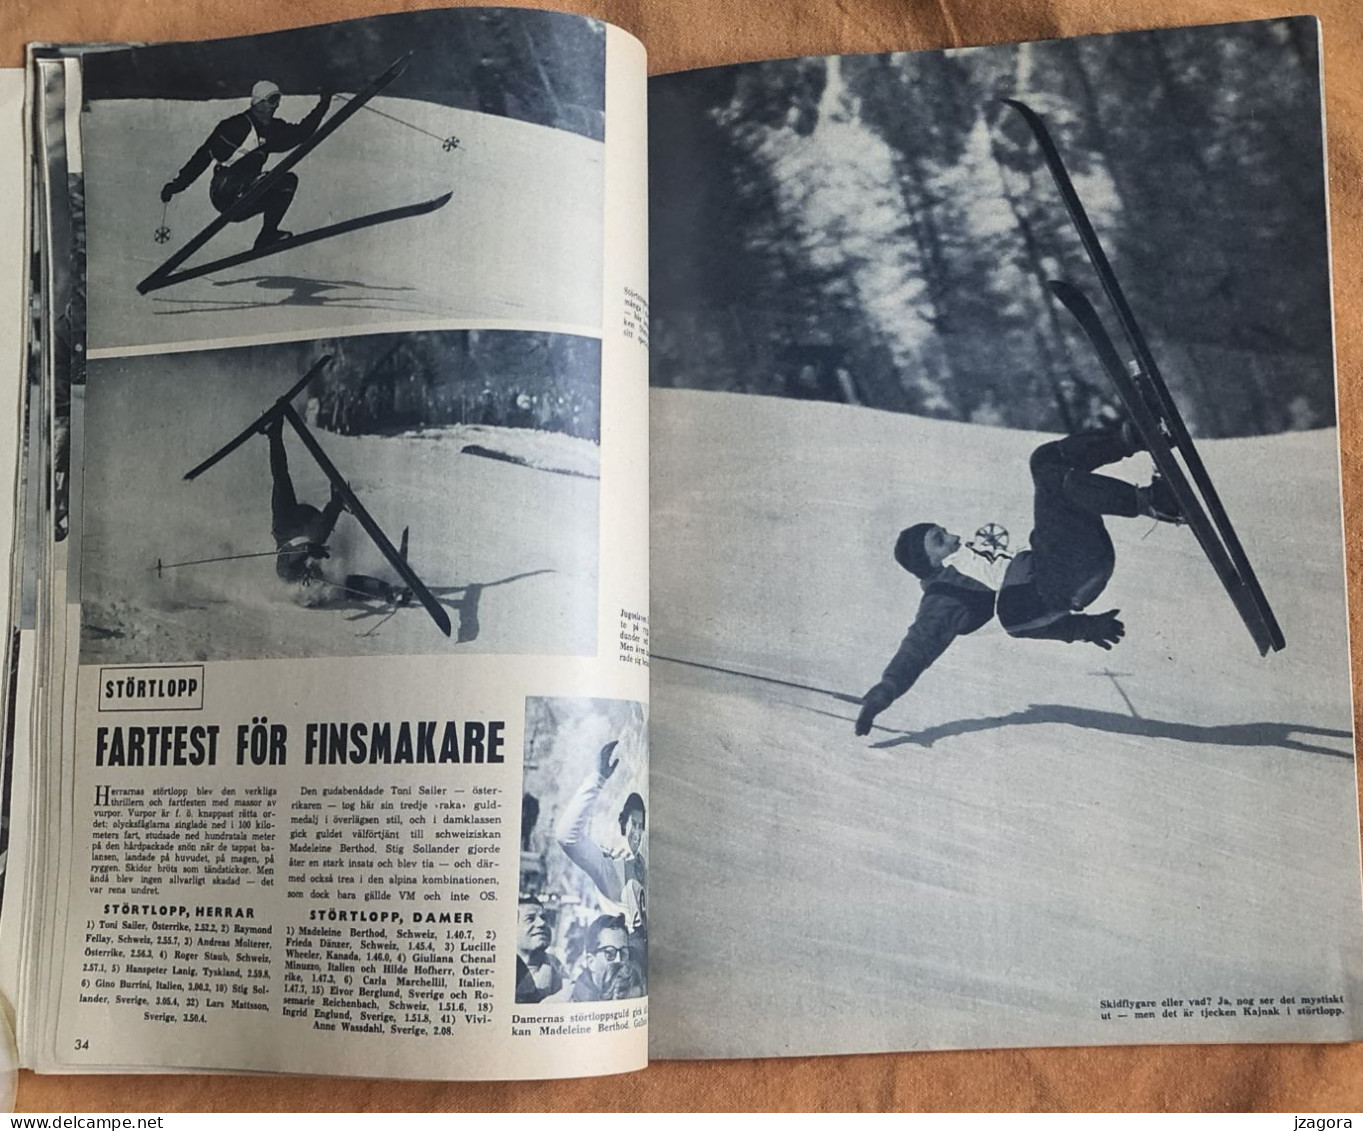 WINTER OLYMPIC GAMES OLYMPISCHE WINTERSPIELE JEUX OLYMPIQUES D'HIVER JUEGOS OLÍMPICOS DE INVIERNO 1956 CORTINA - Libros